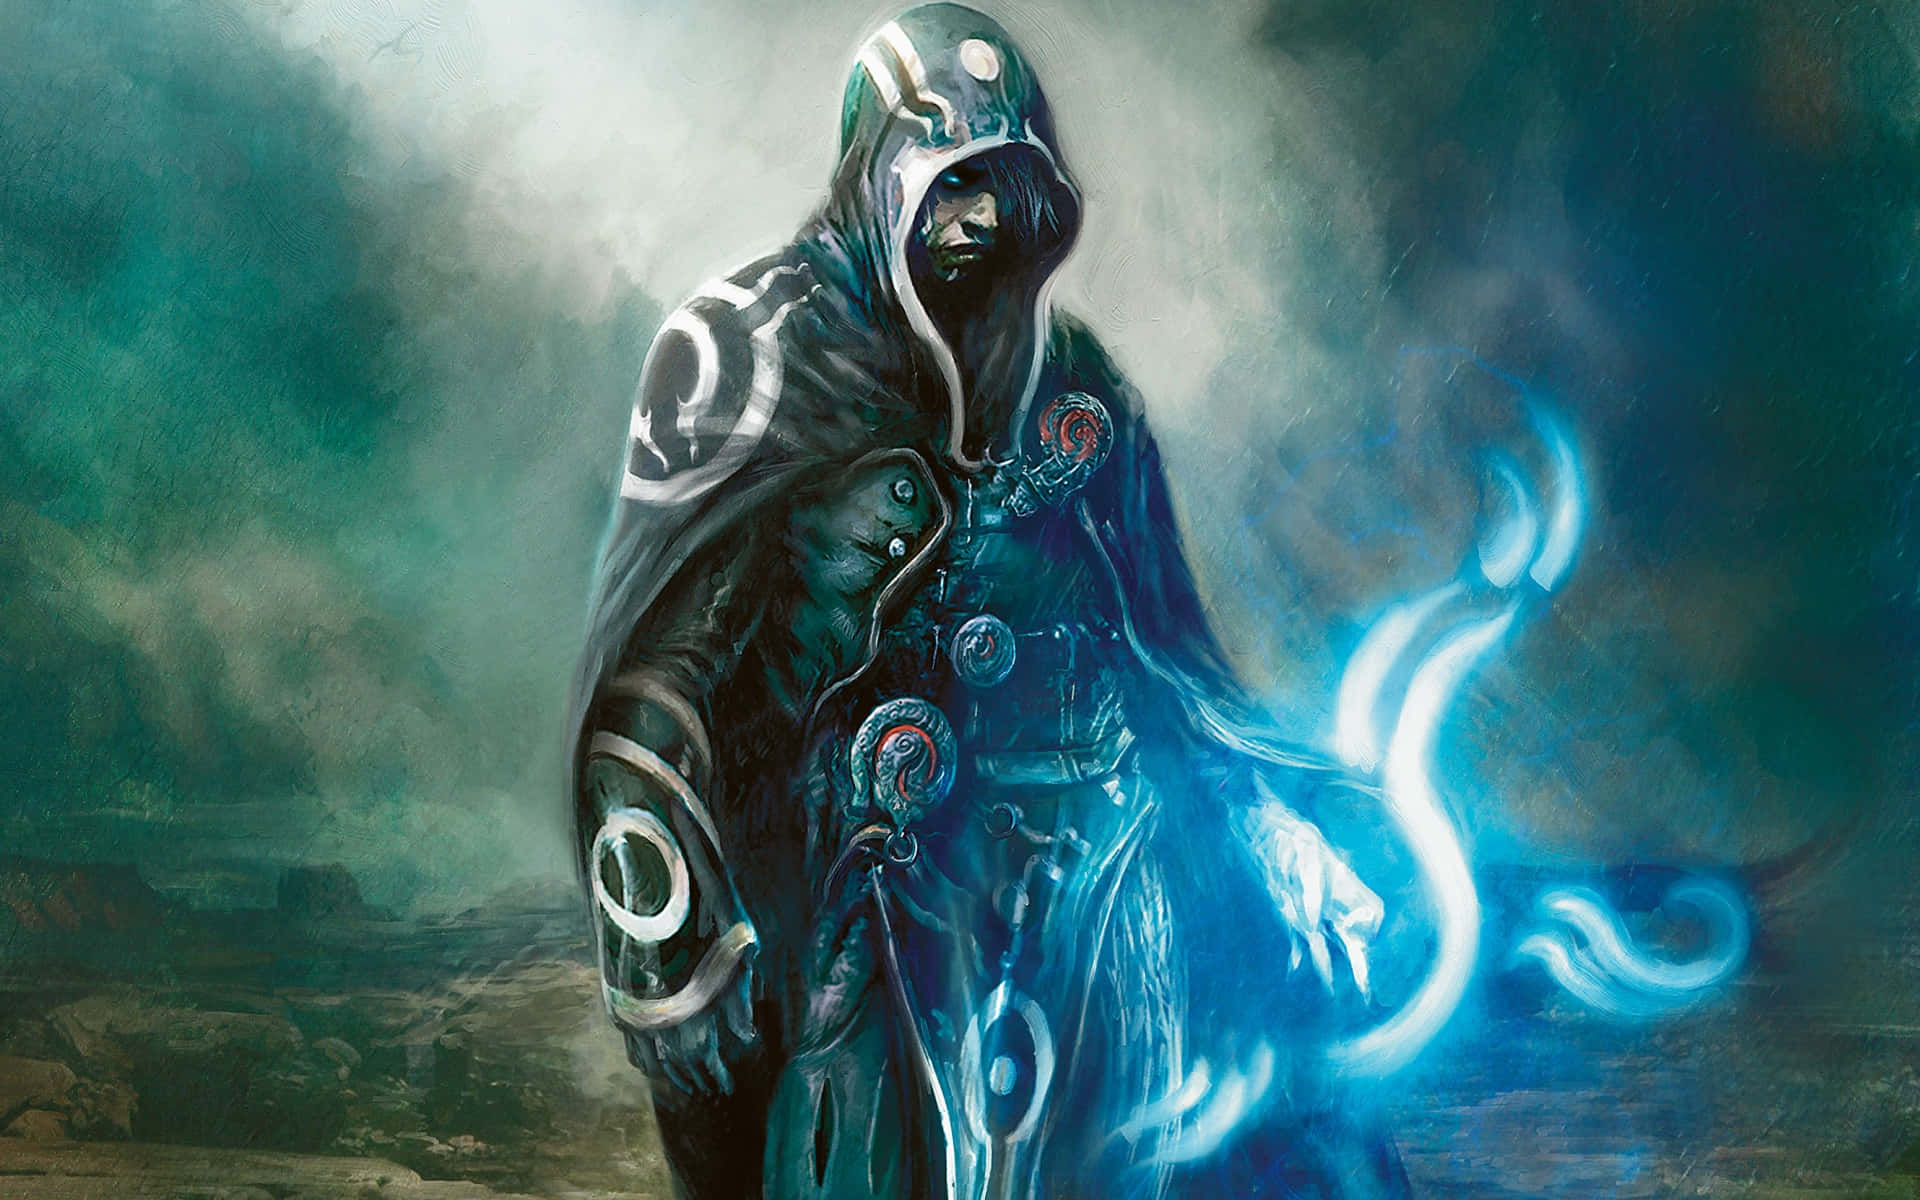 Join the Magic: the Gathering Community